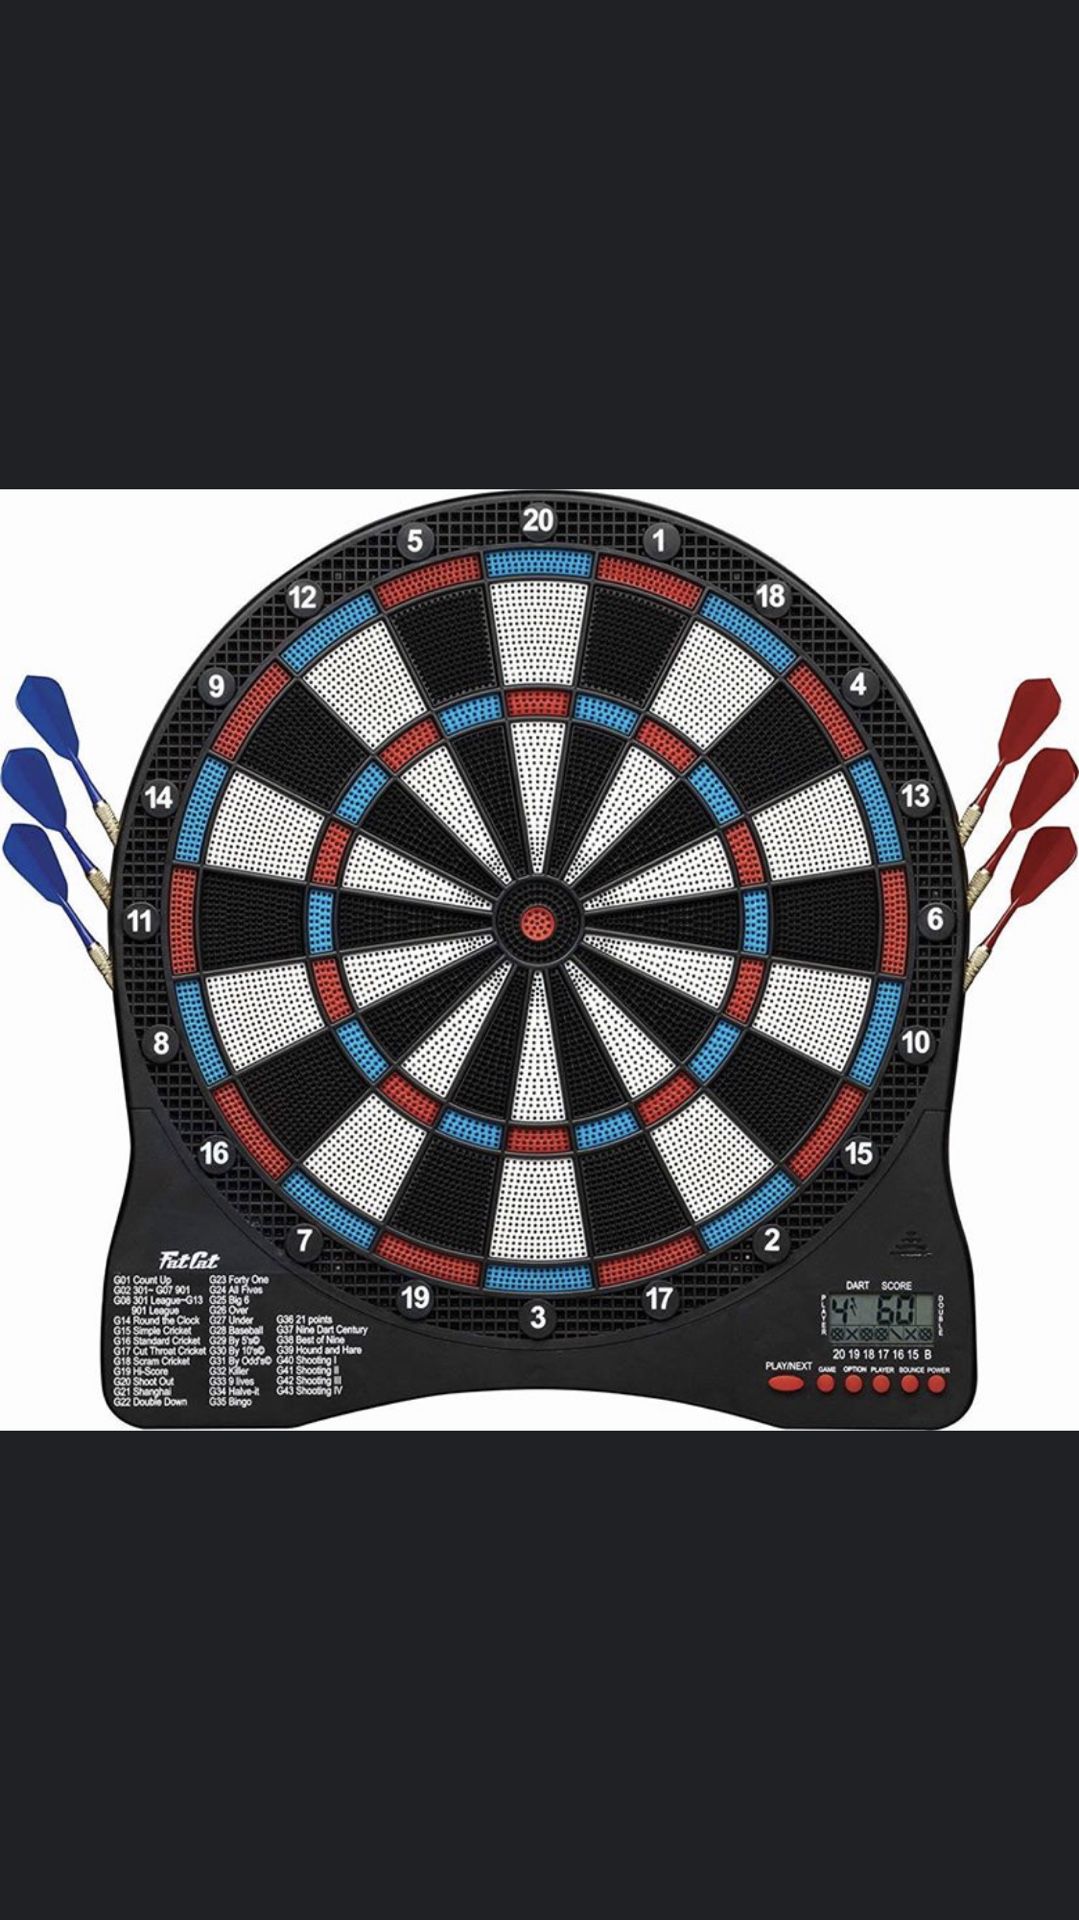 Electronic dart board with extra darts